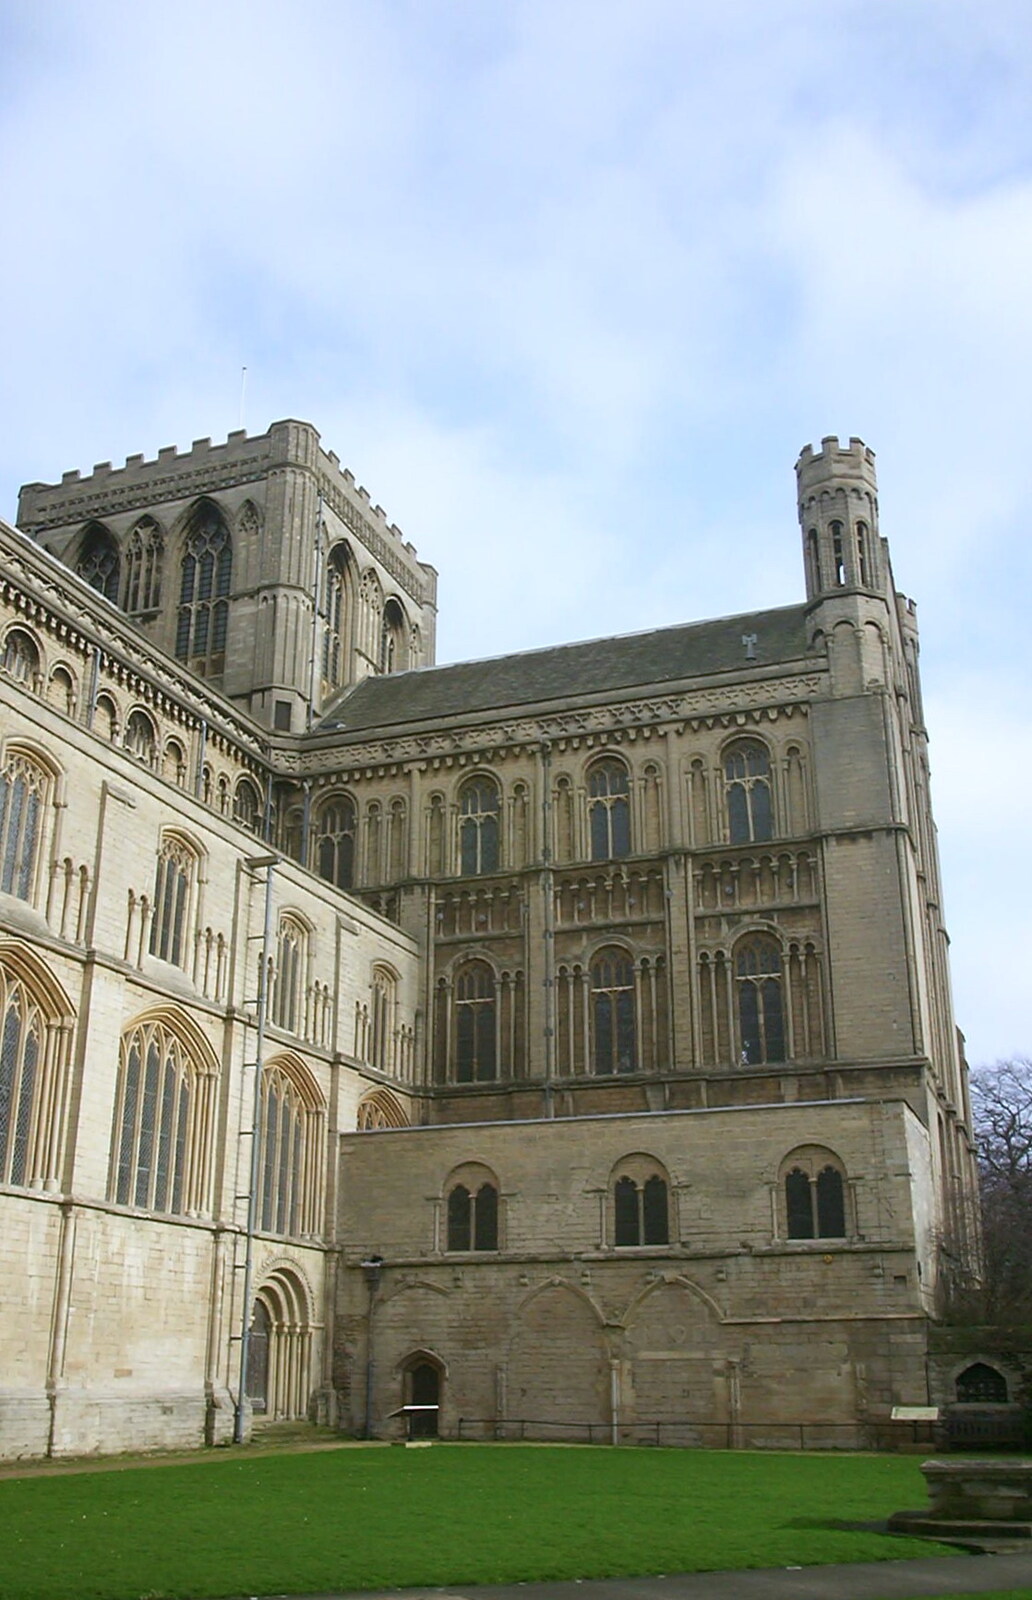 Peterborough has a tower like Winchester's from Marc Chops Trees, Richard Stallman and a March Miscellany, Suffolk and Cambridge - 5th March 2002